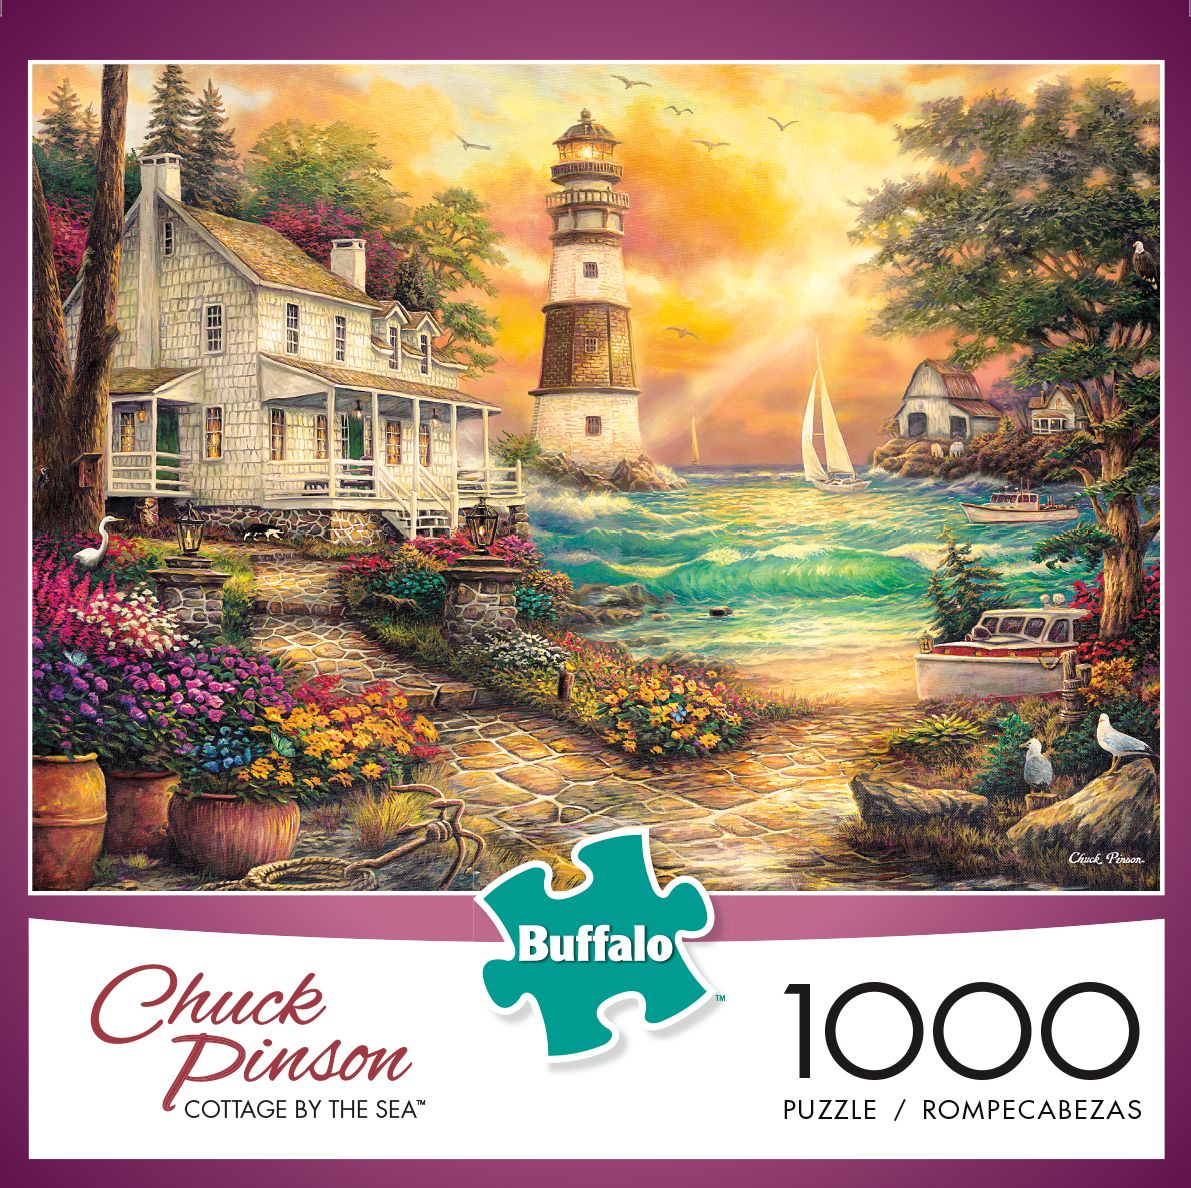 [RDY] [送料無料] Buffalo Games Chuck Pinson Cottage by the Sea 1000 Pieces Jigsaw Puzzle [楽天海外通販] | Buffalo Games Chuck Pinson Cottage by the Sea 1000 Pieces Jigsaw Puzzle